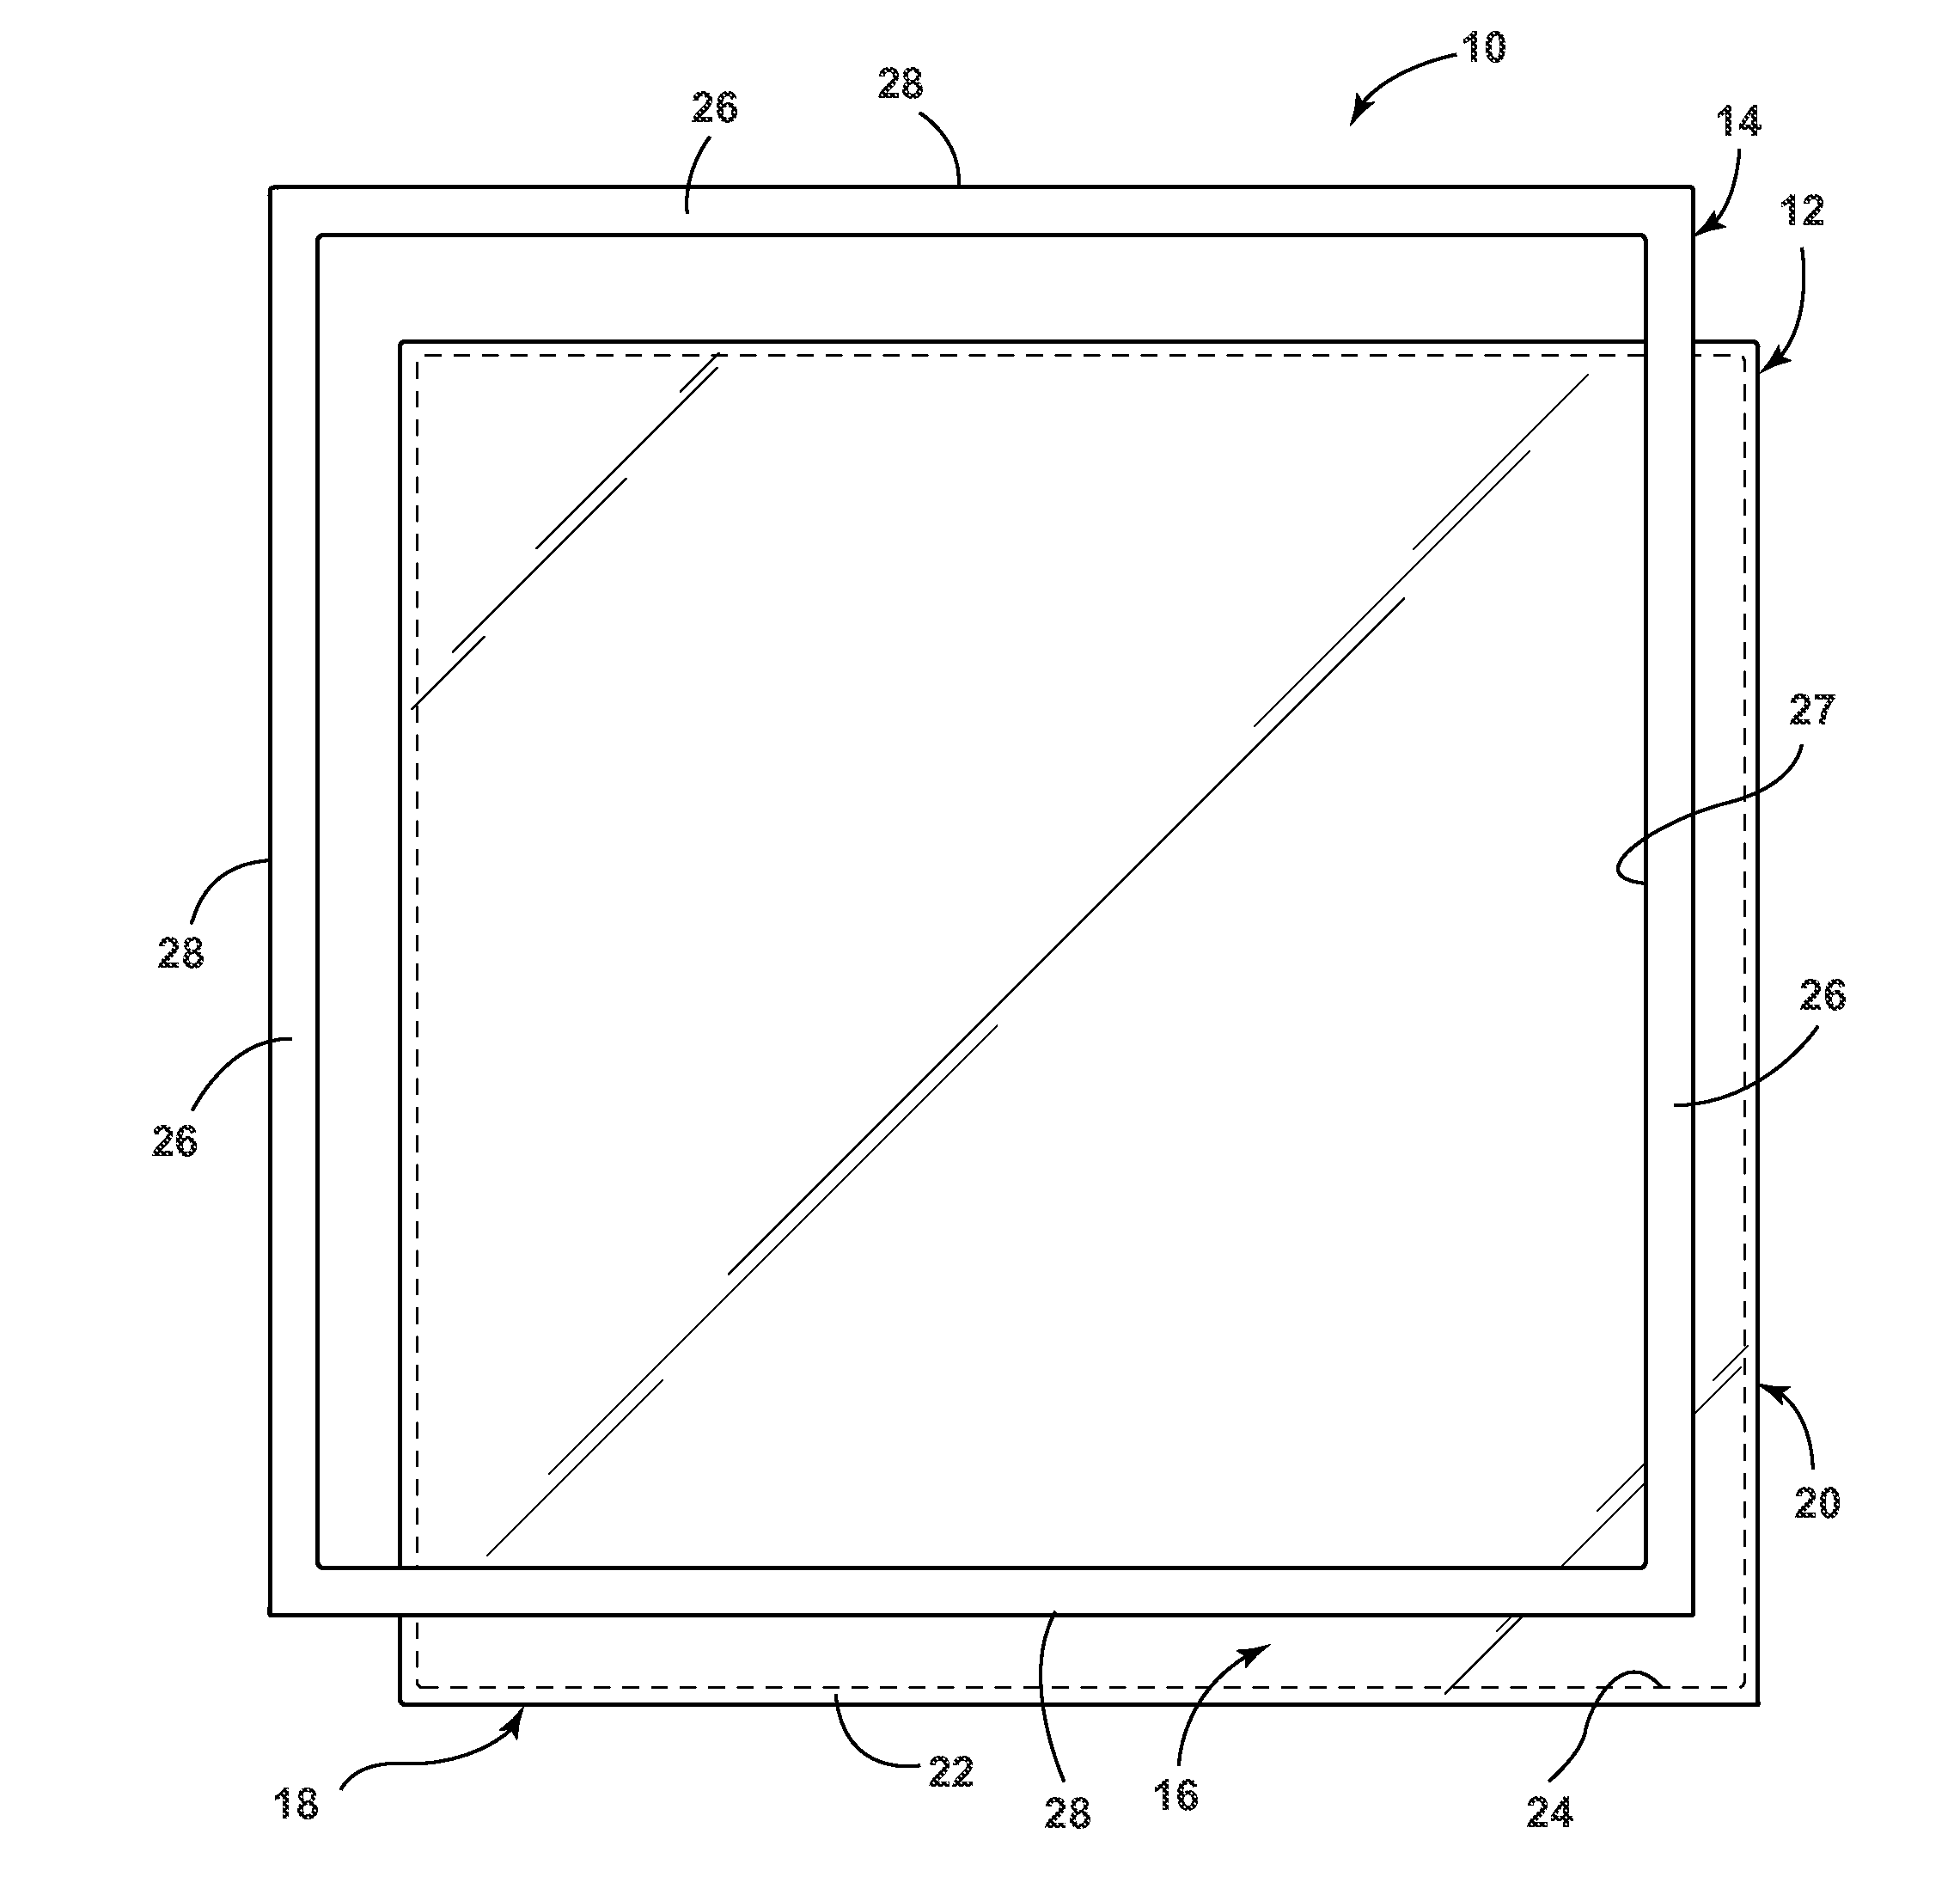 Method of encapsulating a projection and making an evacuated cabinet